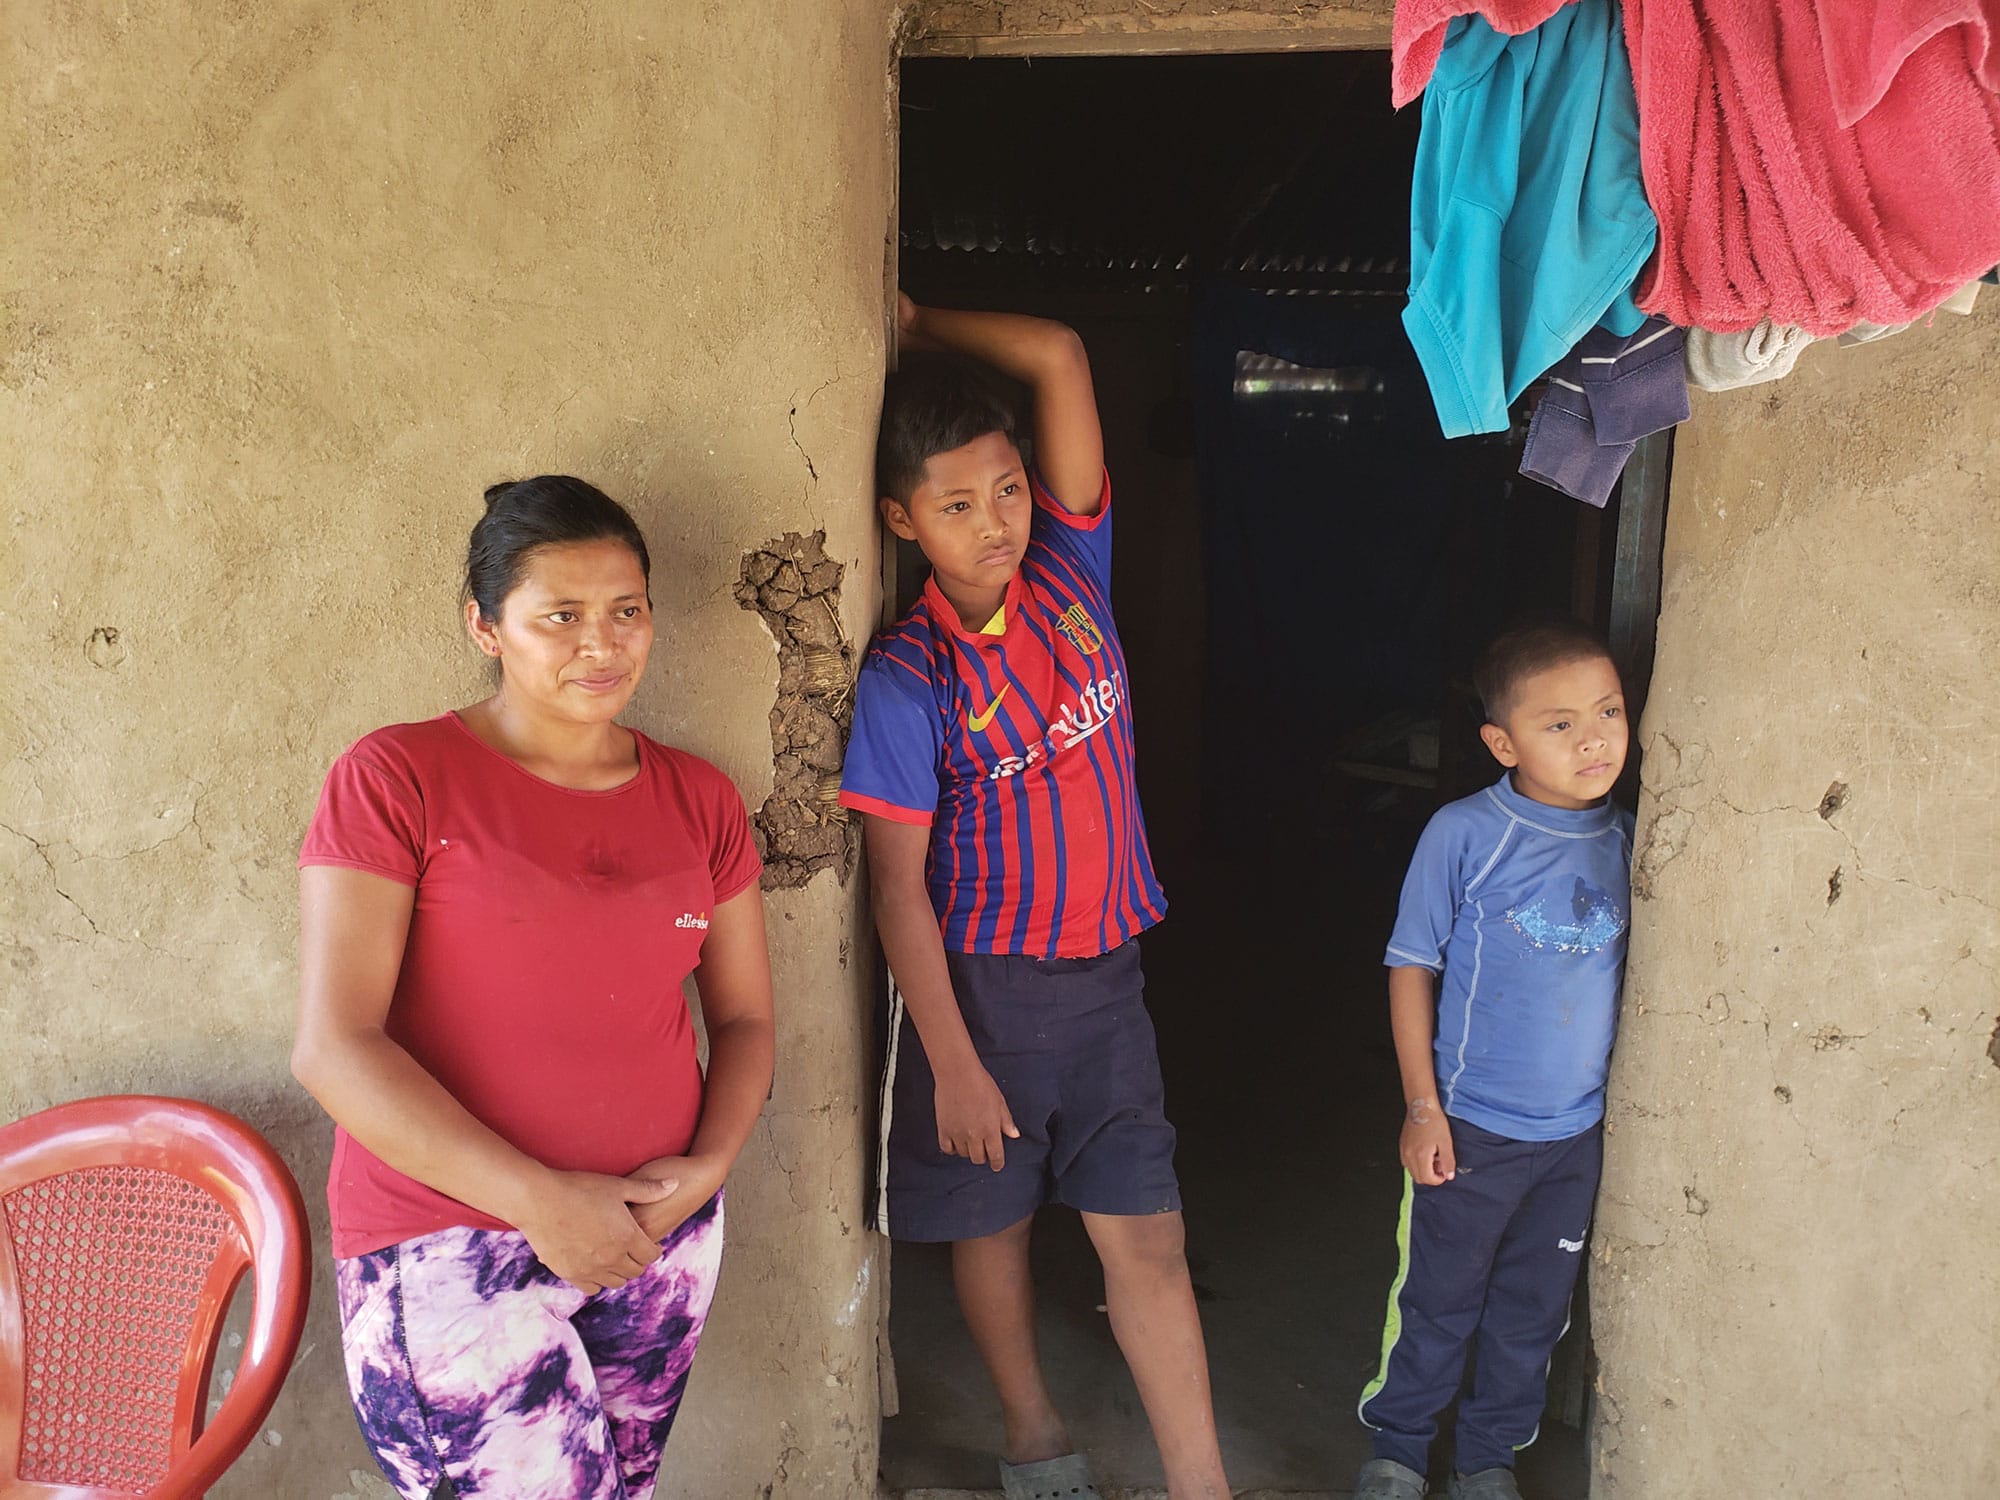 Mother and children stand by a doorway